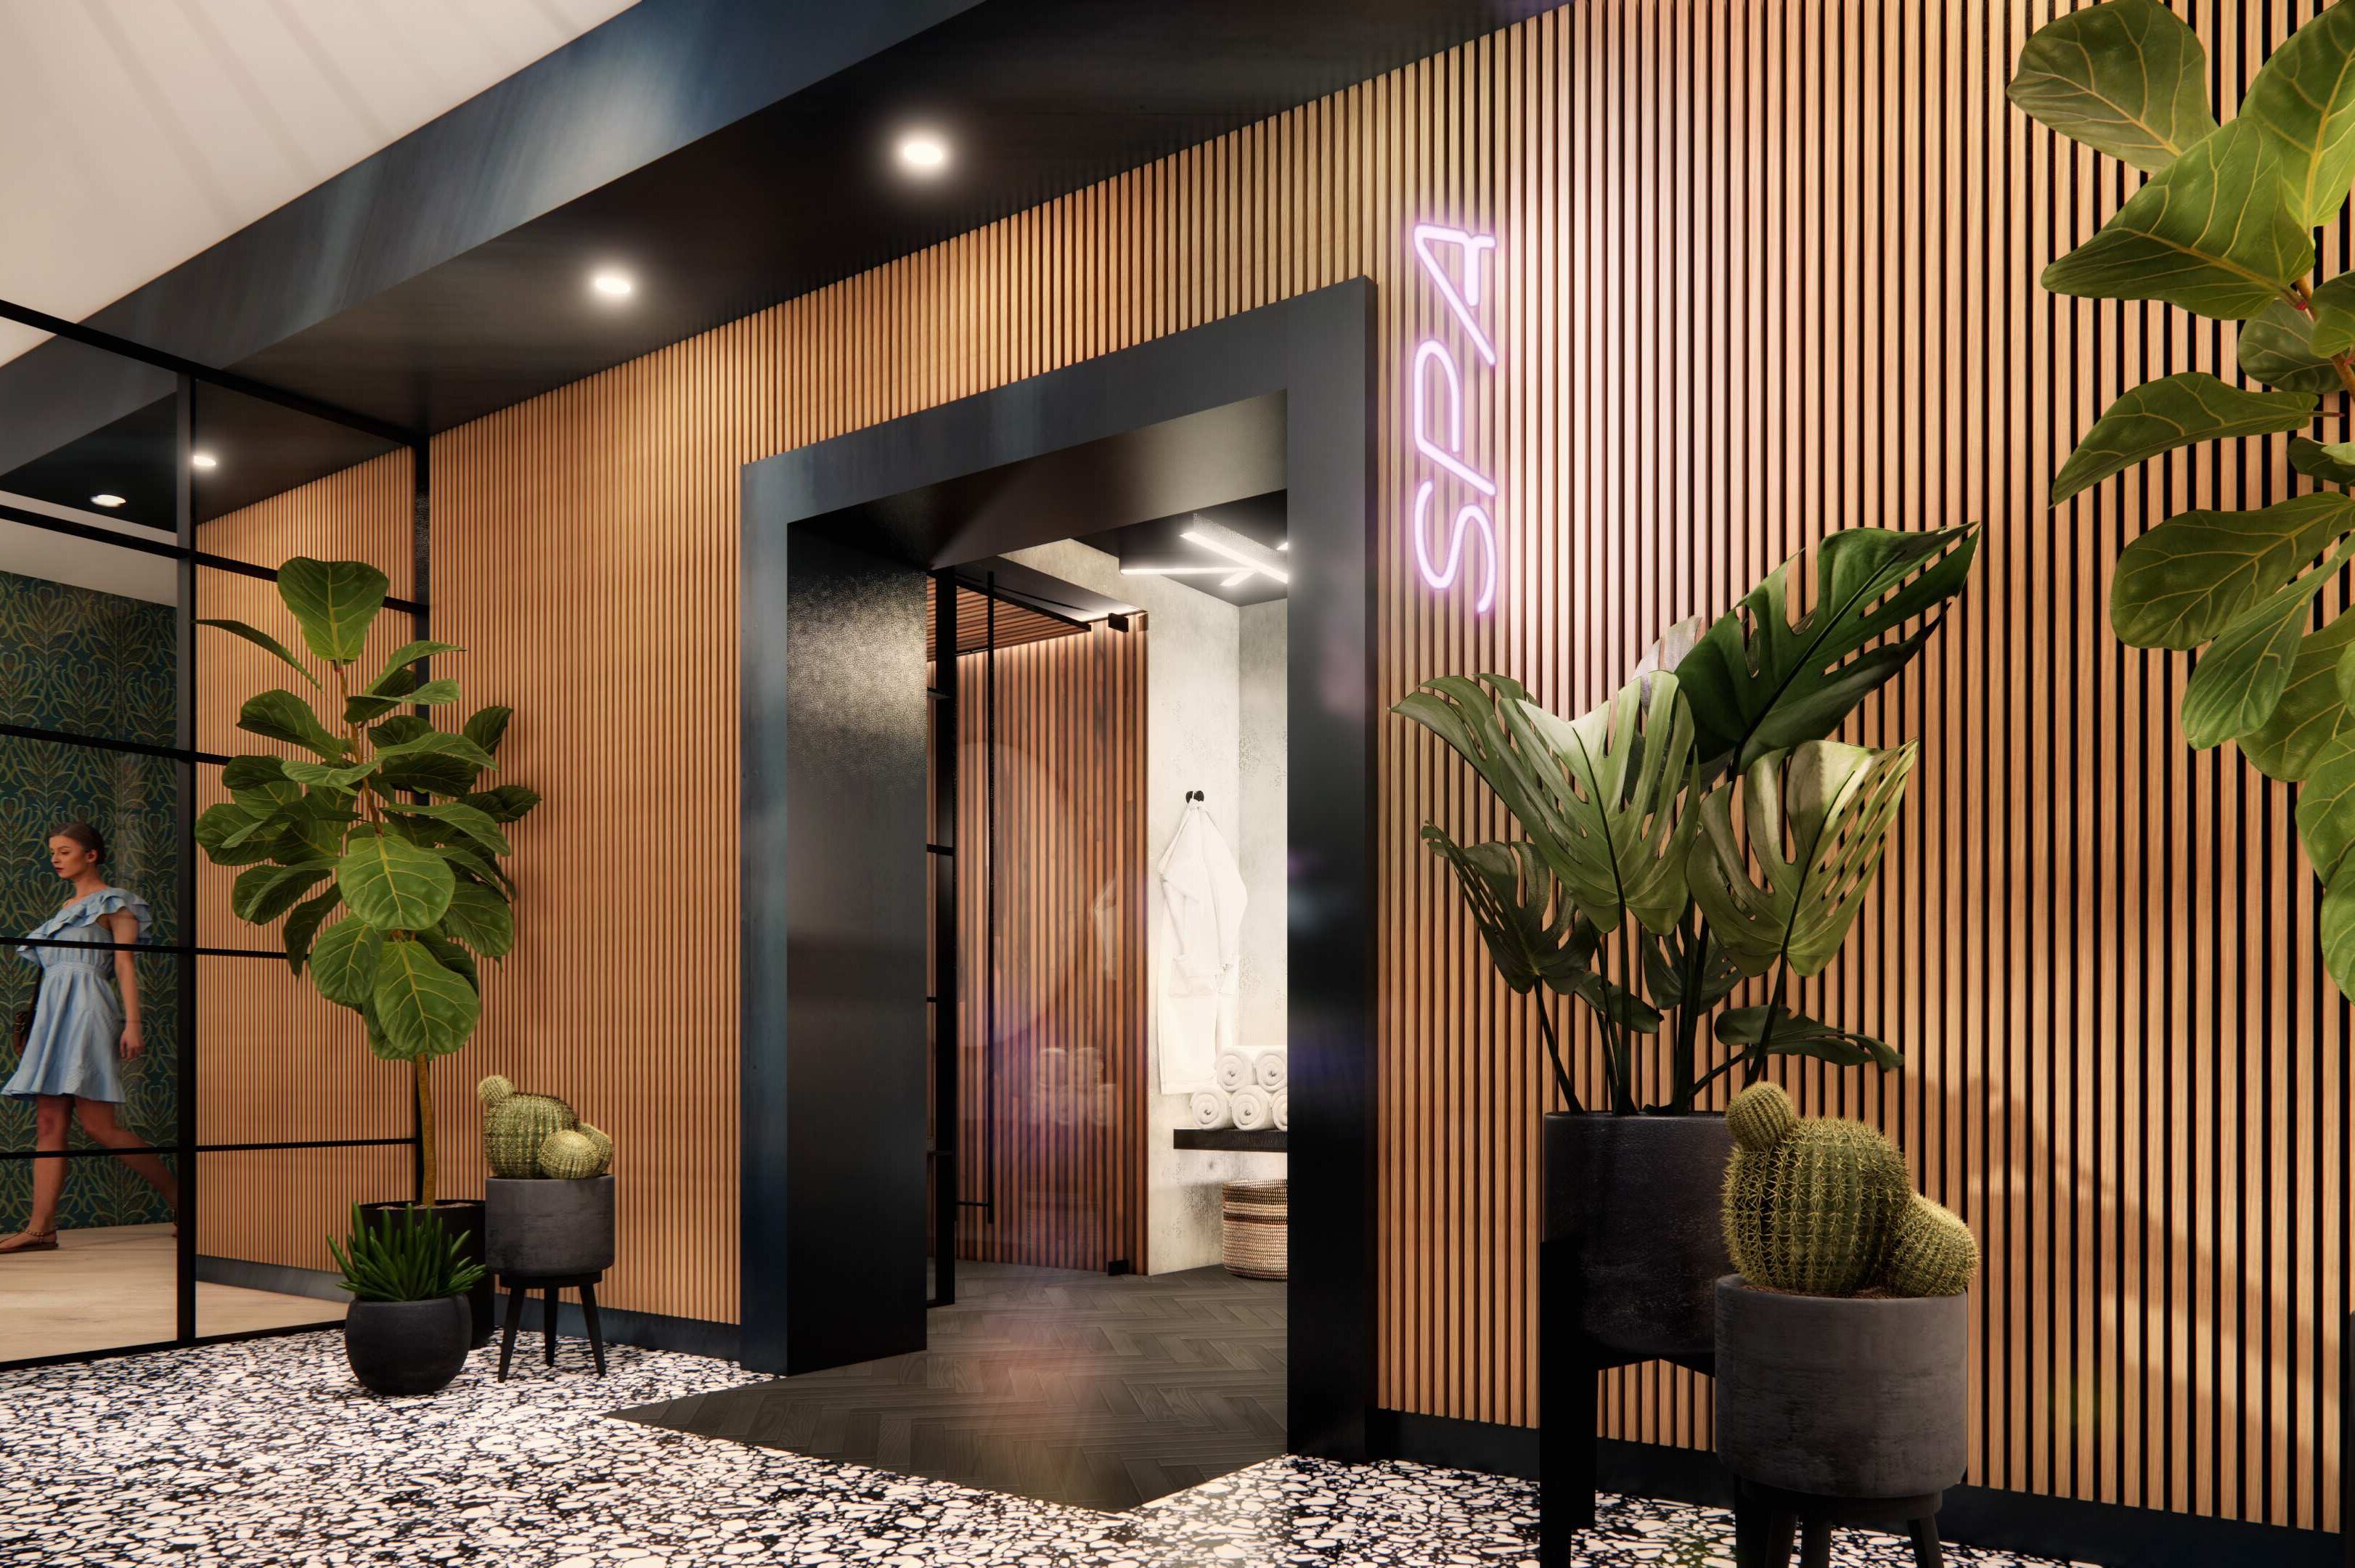 rendering of entry to sauna with spin sign Waterloo Tower, student housing apartment in West Campus near UT Austin.